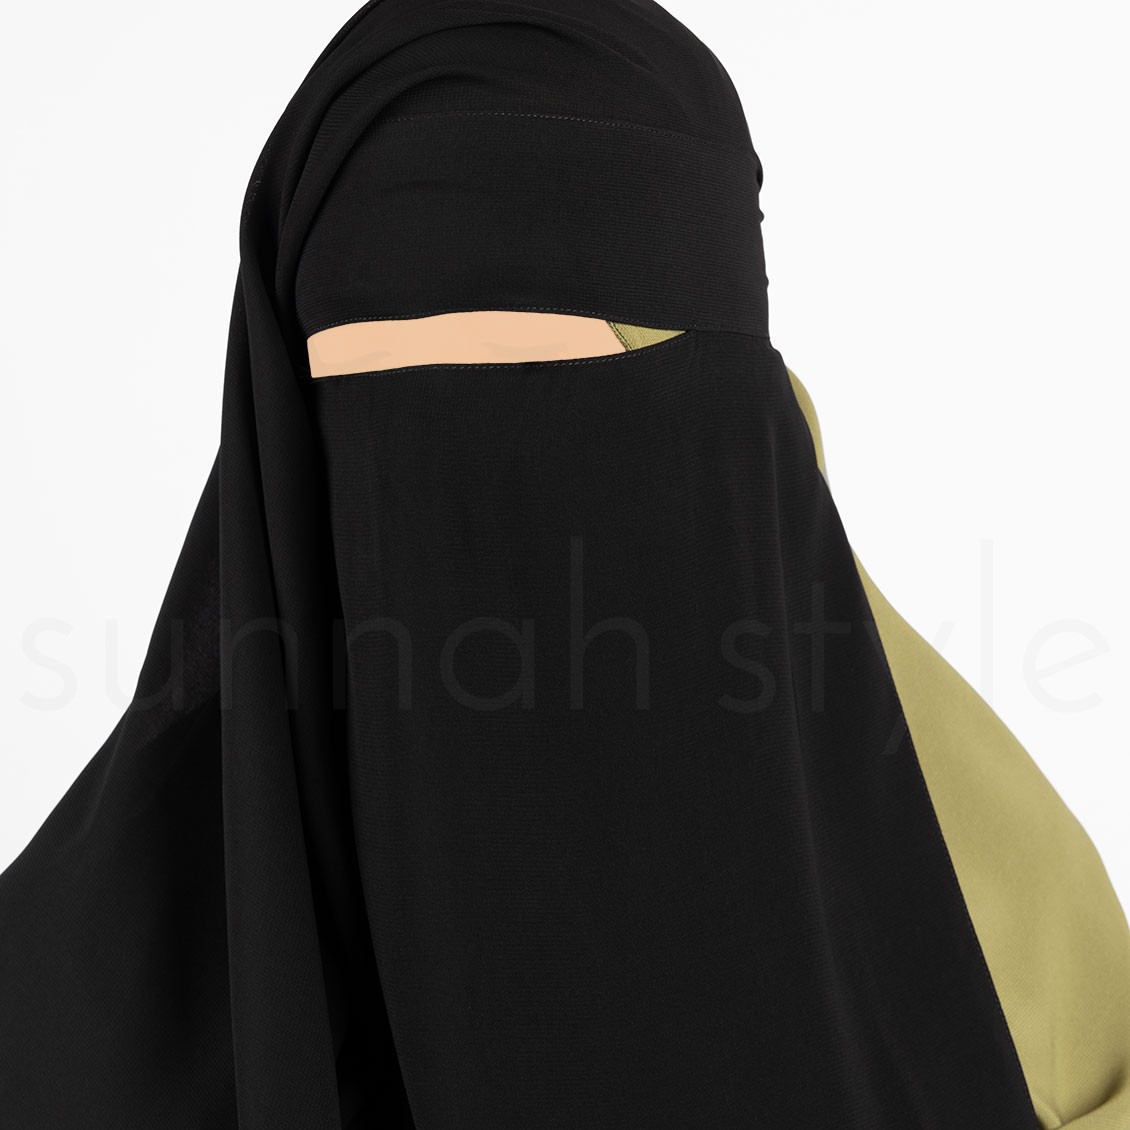 Sunnah Style Long Two Layer Niqab Black